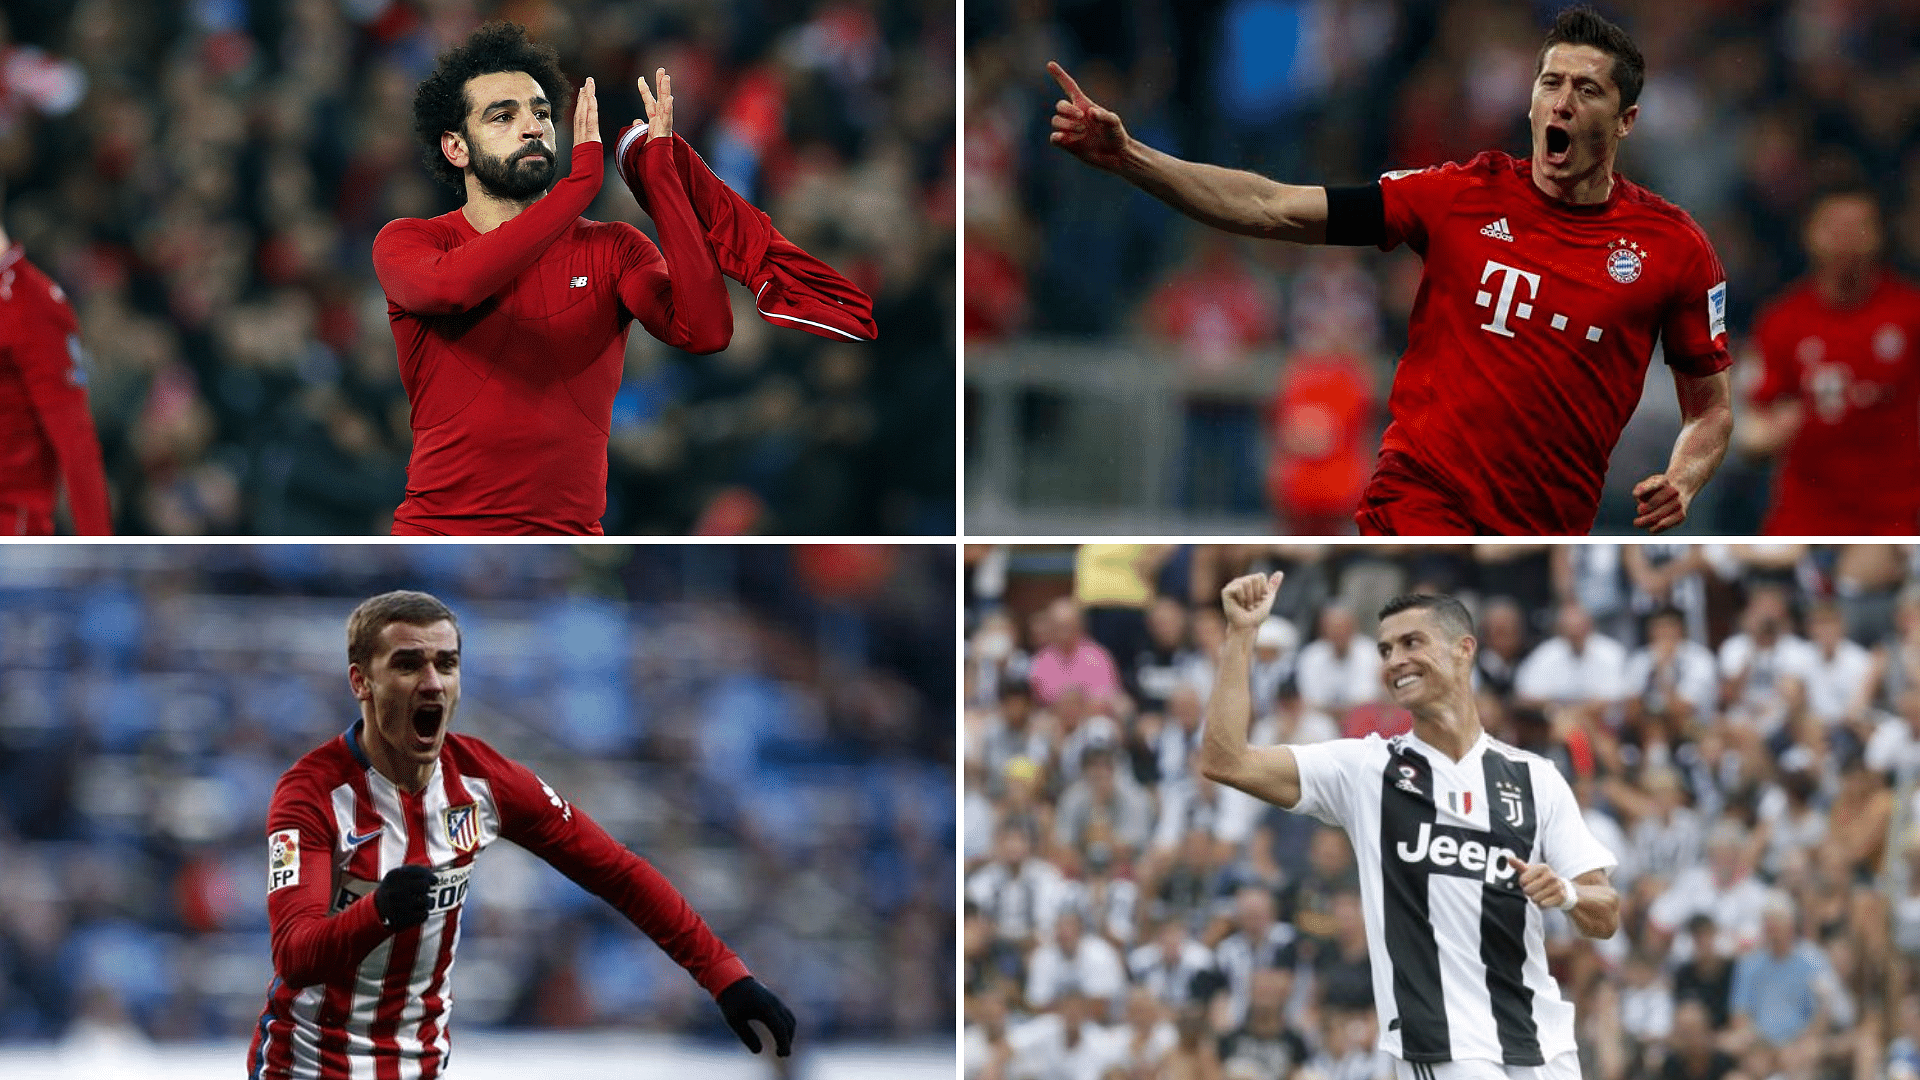 Liverpool against Bayern Munich, and Atletico Madrid versus Juventus will be the headline match-ups of the UEFA Champions League round of 16.